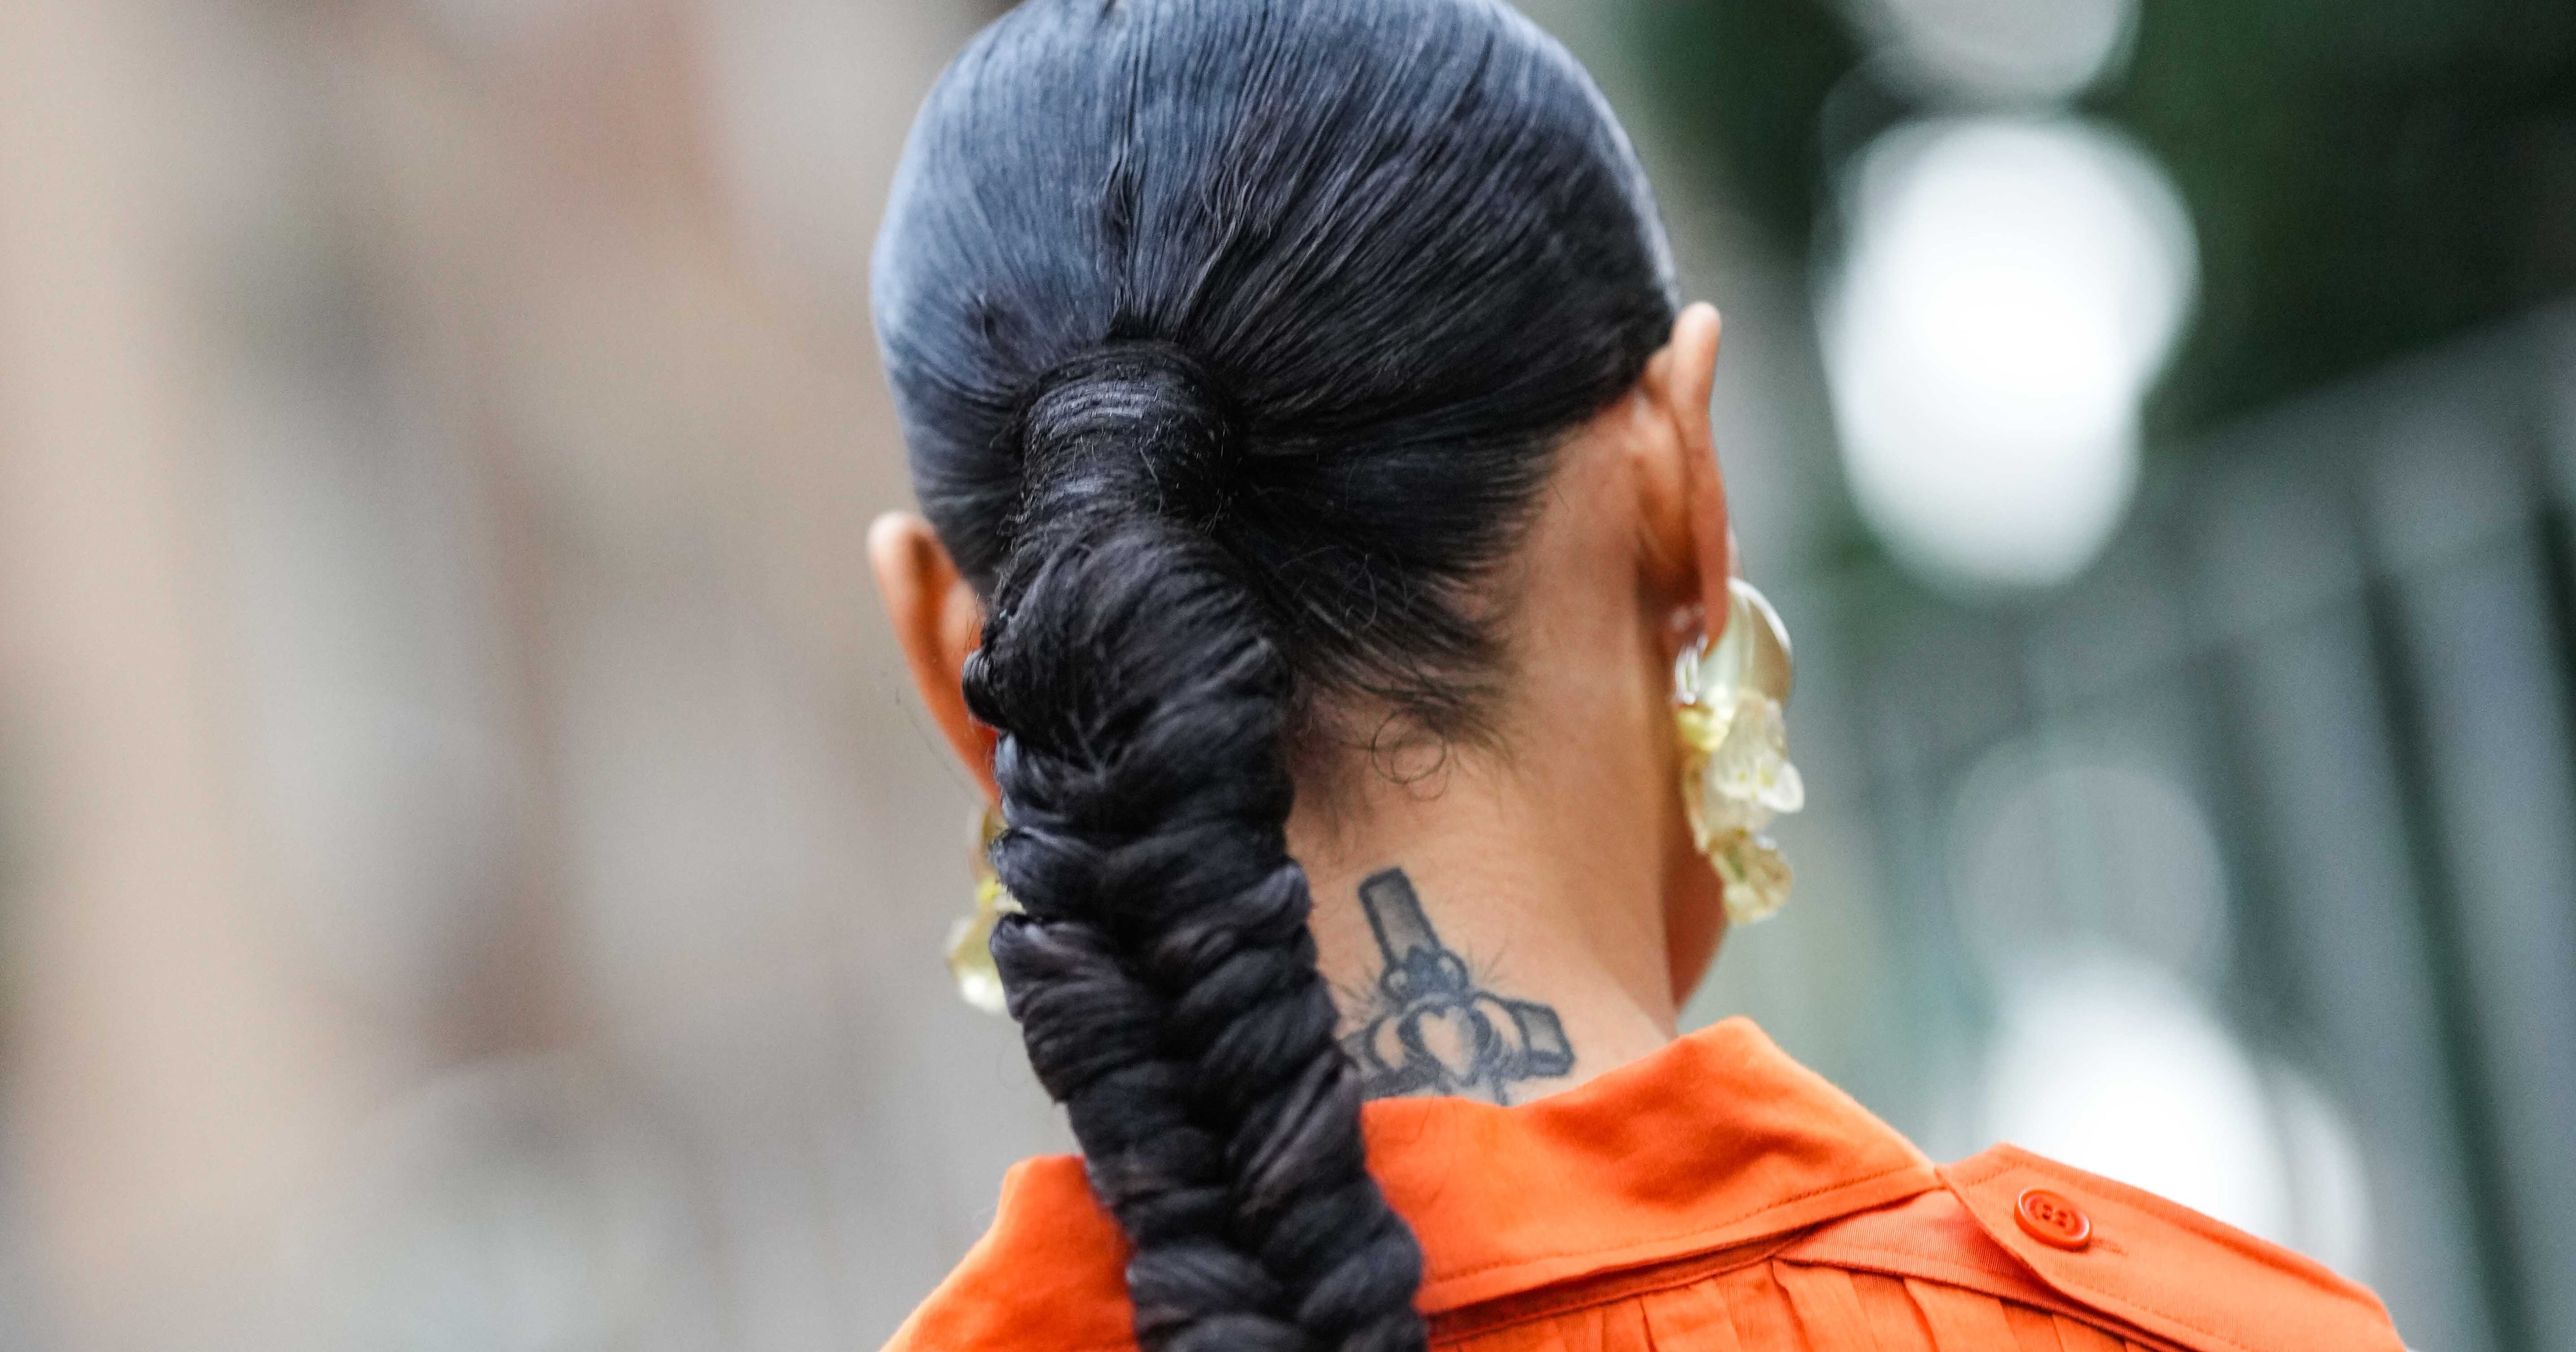 6 Tattoo Trends That Will Be Everywhere This Summer